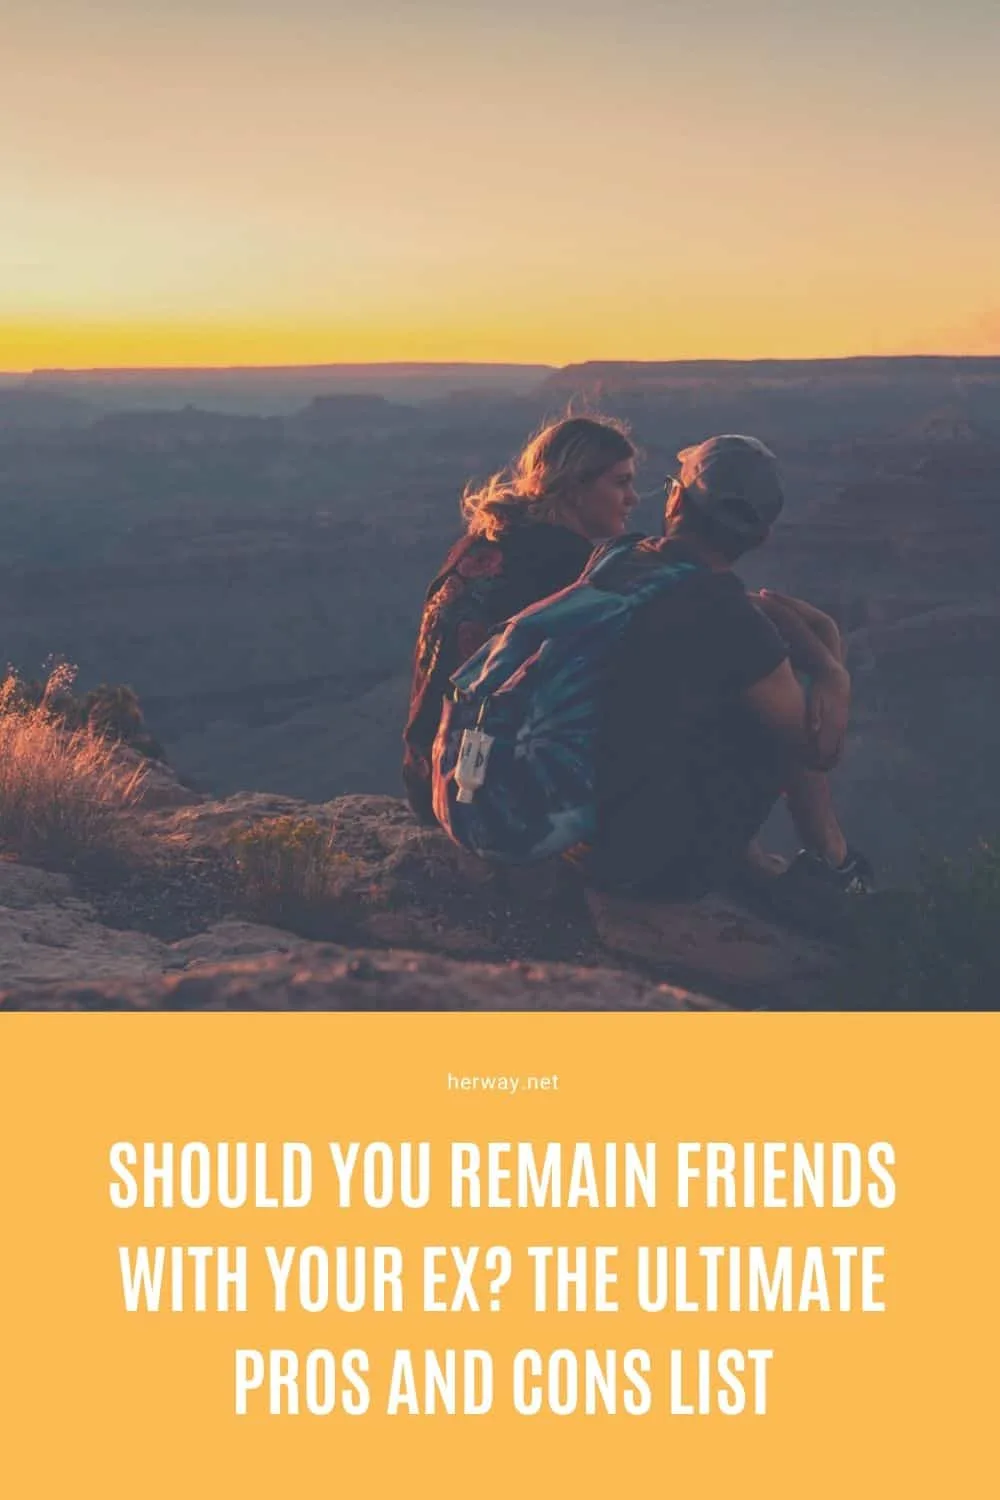 Should You Remain Friends With Your Ex? The Ultimate Pros And Cons List